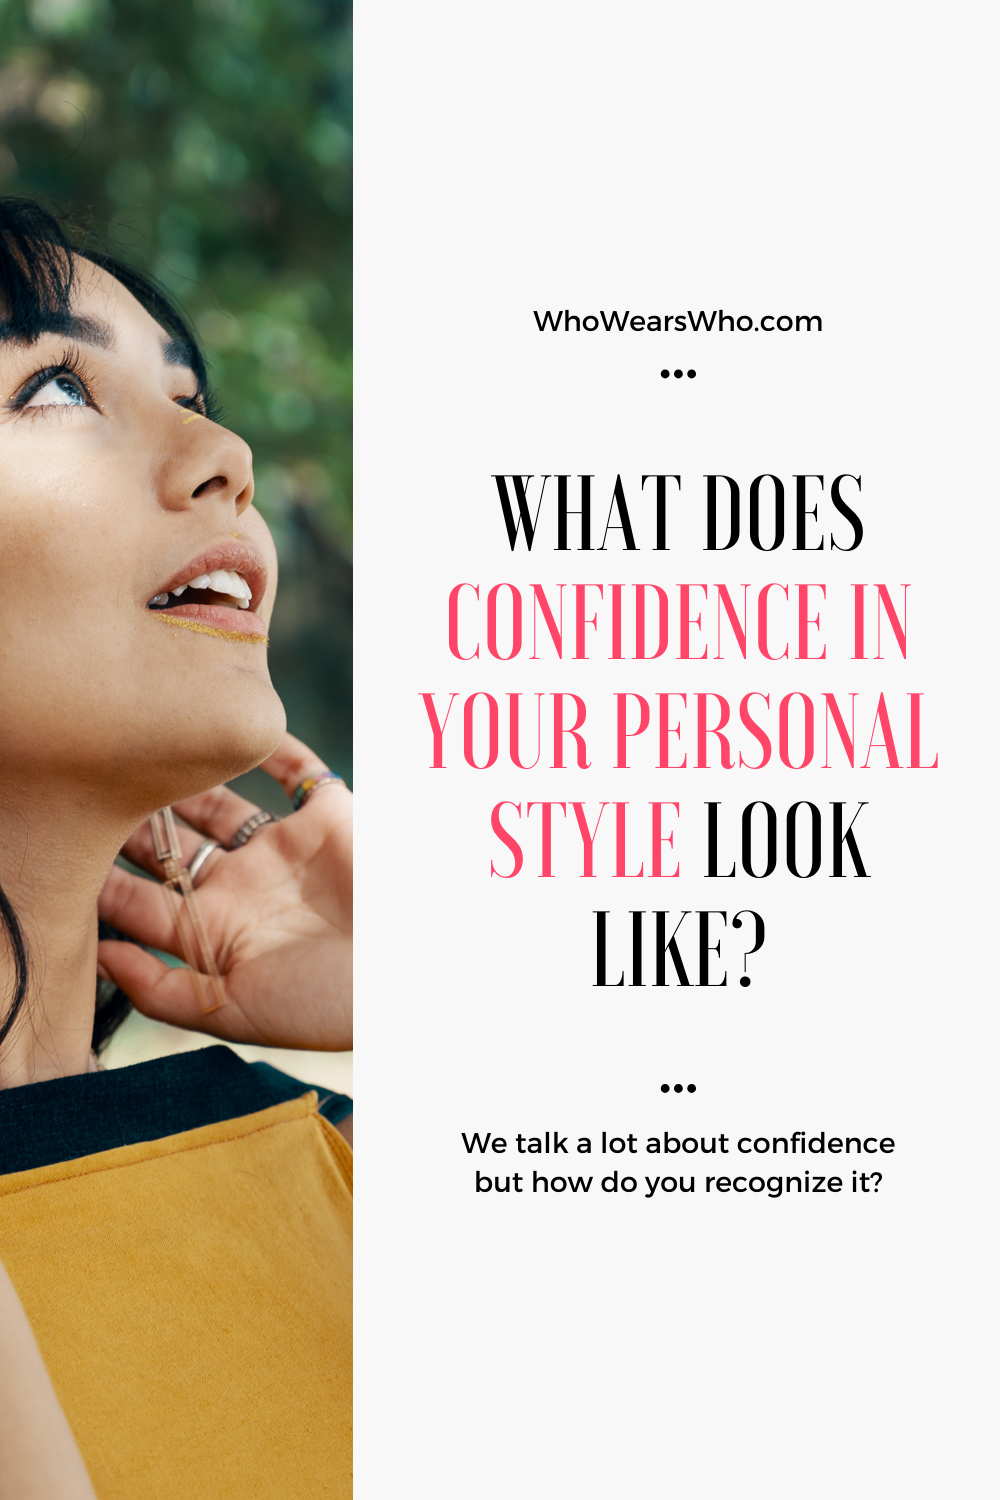 What does confidence in your personal style look like